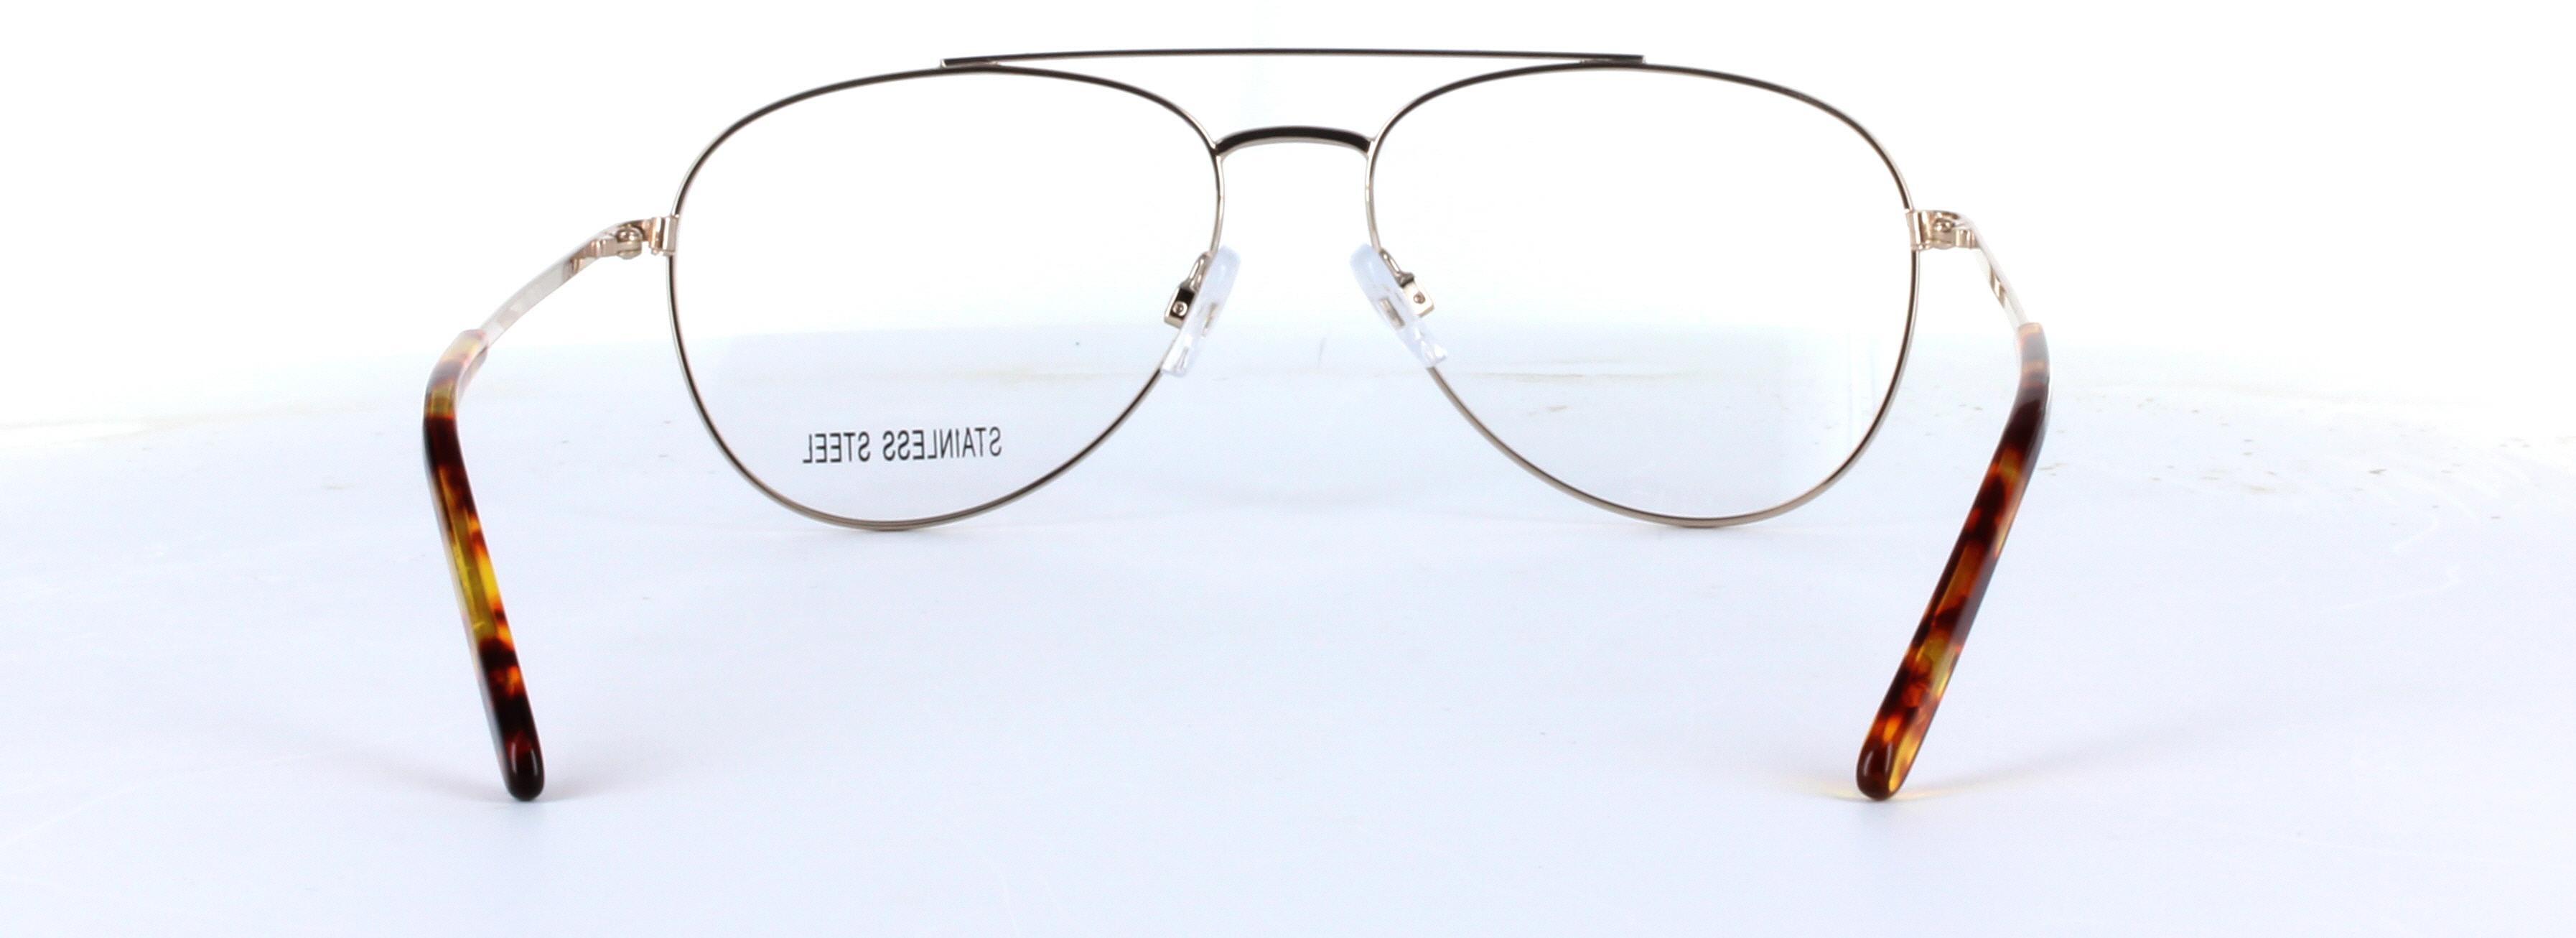 Gianni Gold Full Rim Oval Metal Glasses - Image View 3